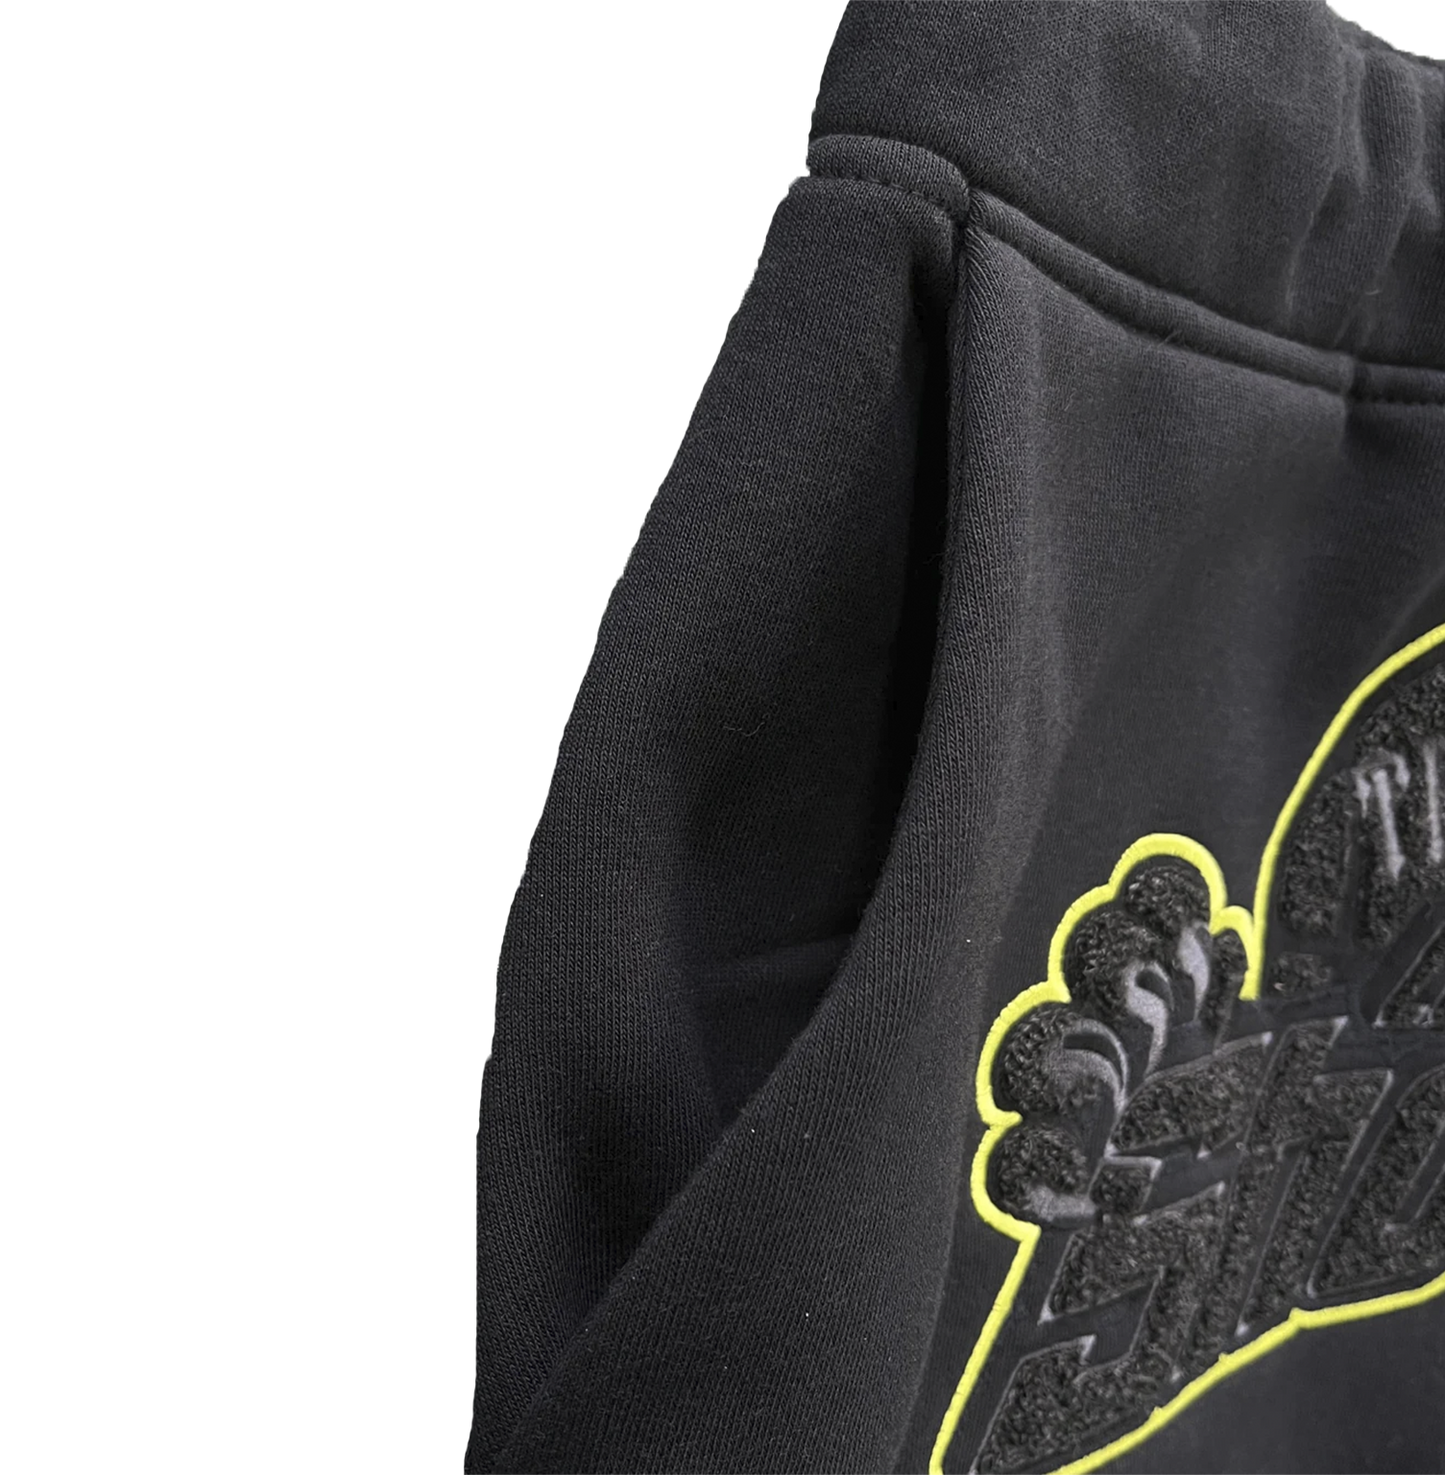 TRAPSTAR SHOOTERS HOODIE TRACKSUIT - BLACK/LIME